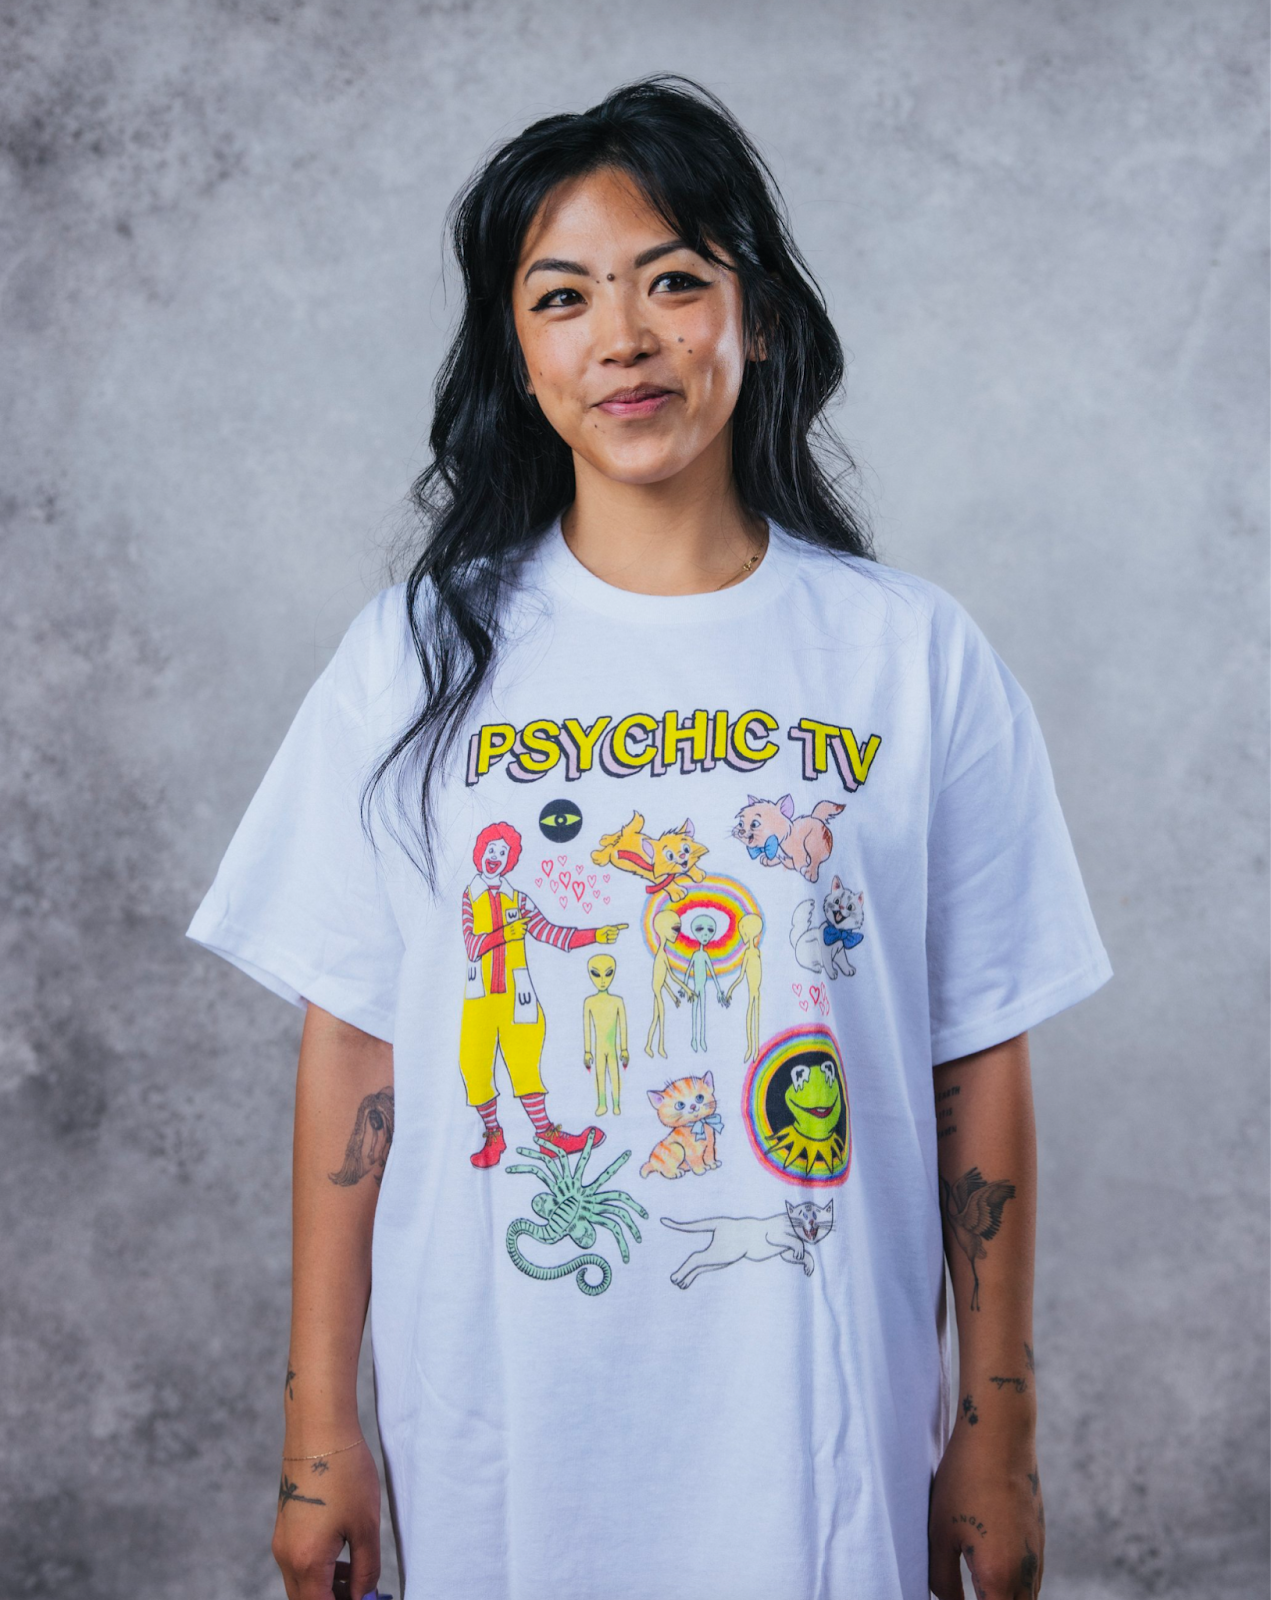 Woman wearing a PHYCHIC TV blue shirt with various bits of weird pop culture on it